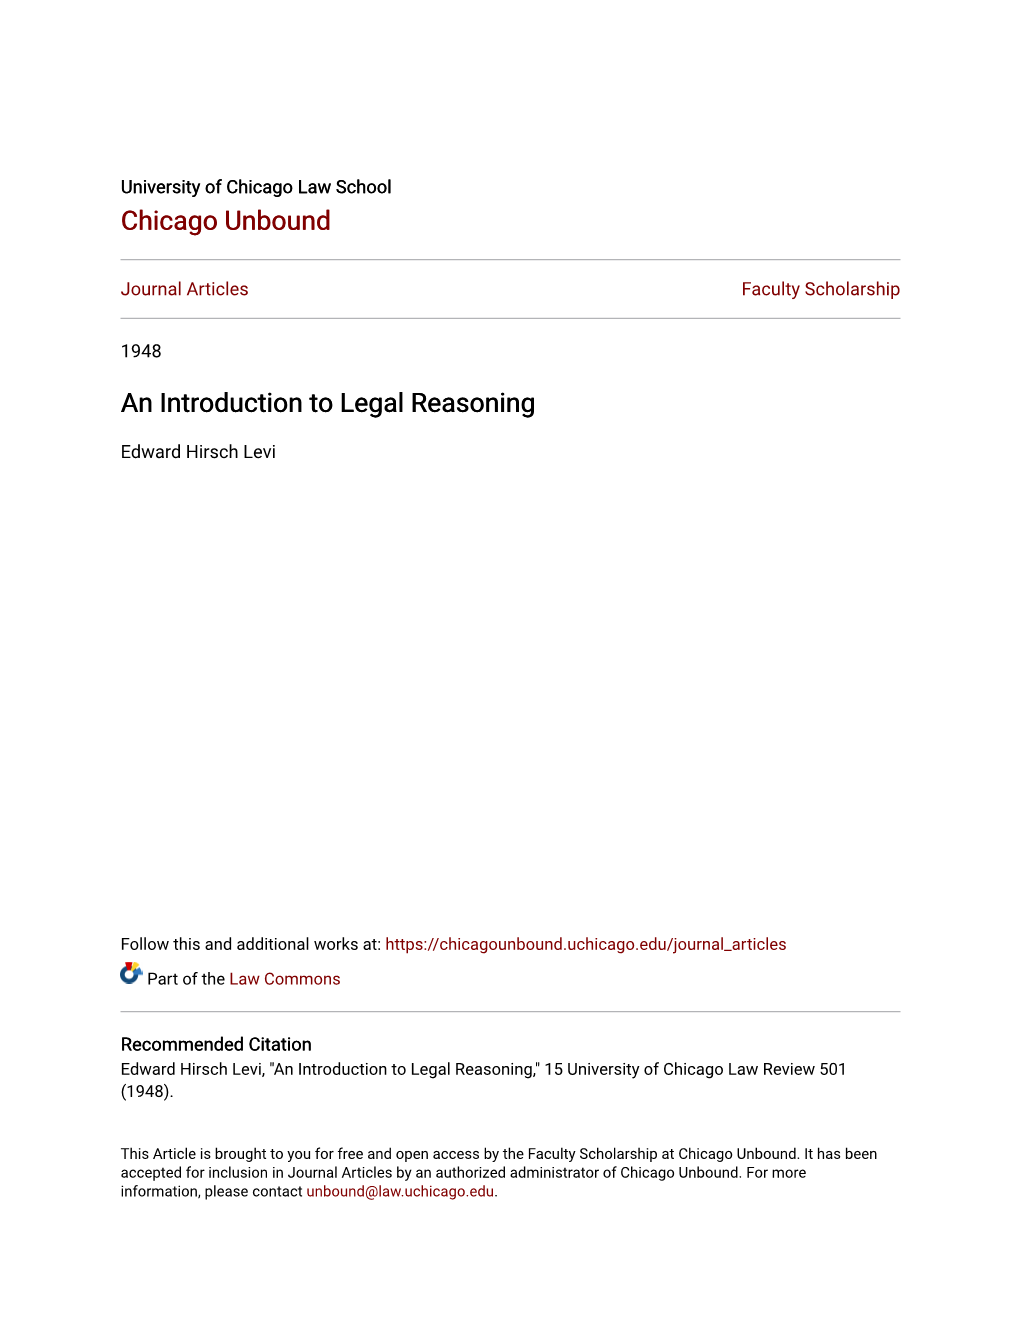 An Introduction to Legal Reasoning